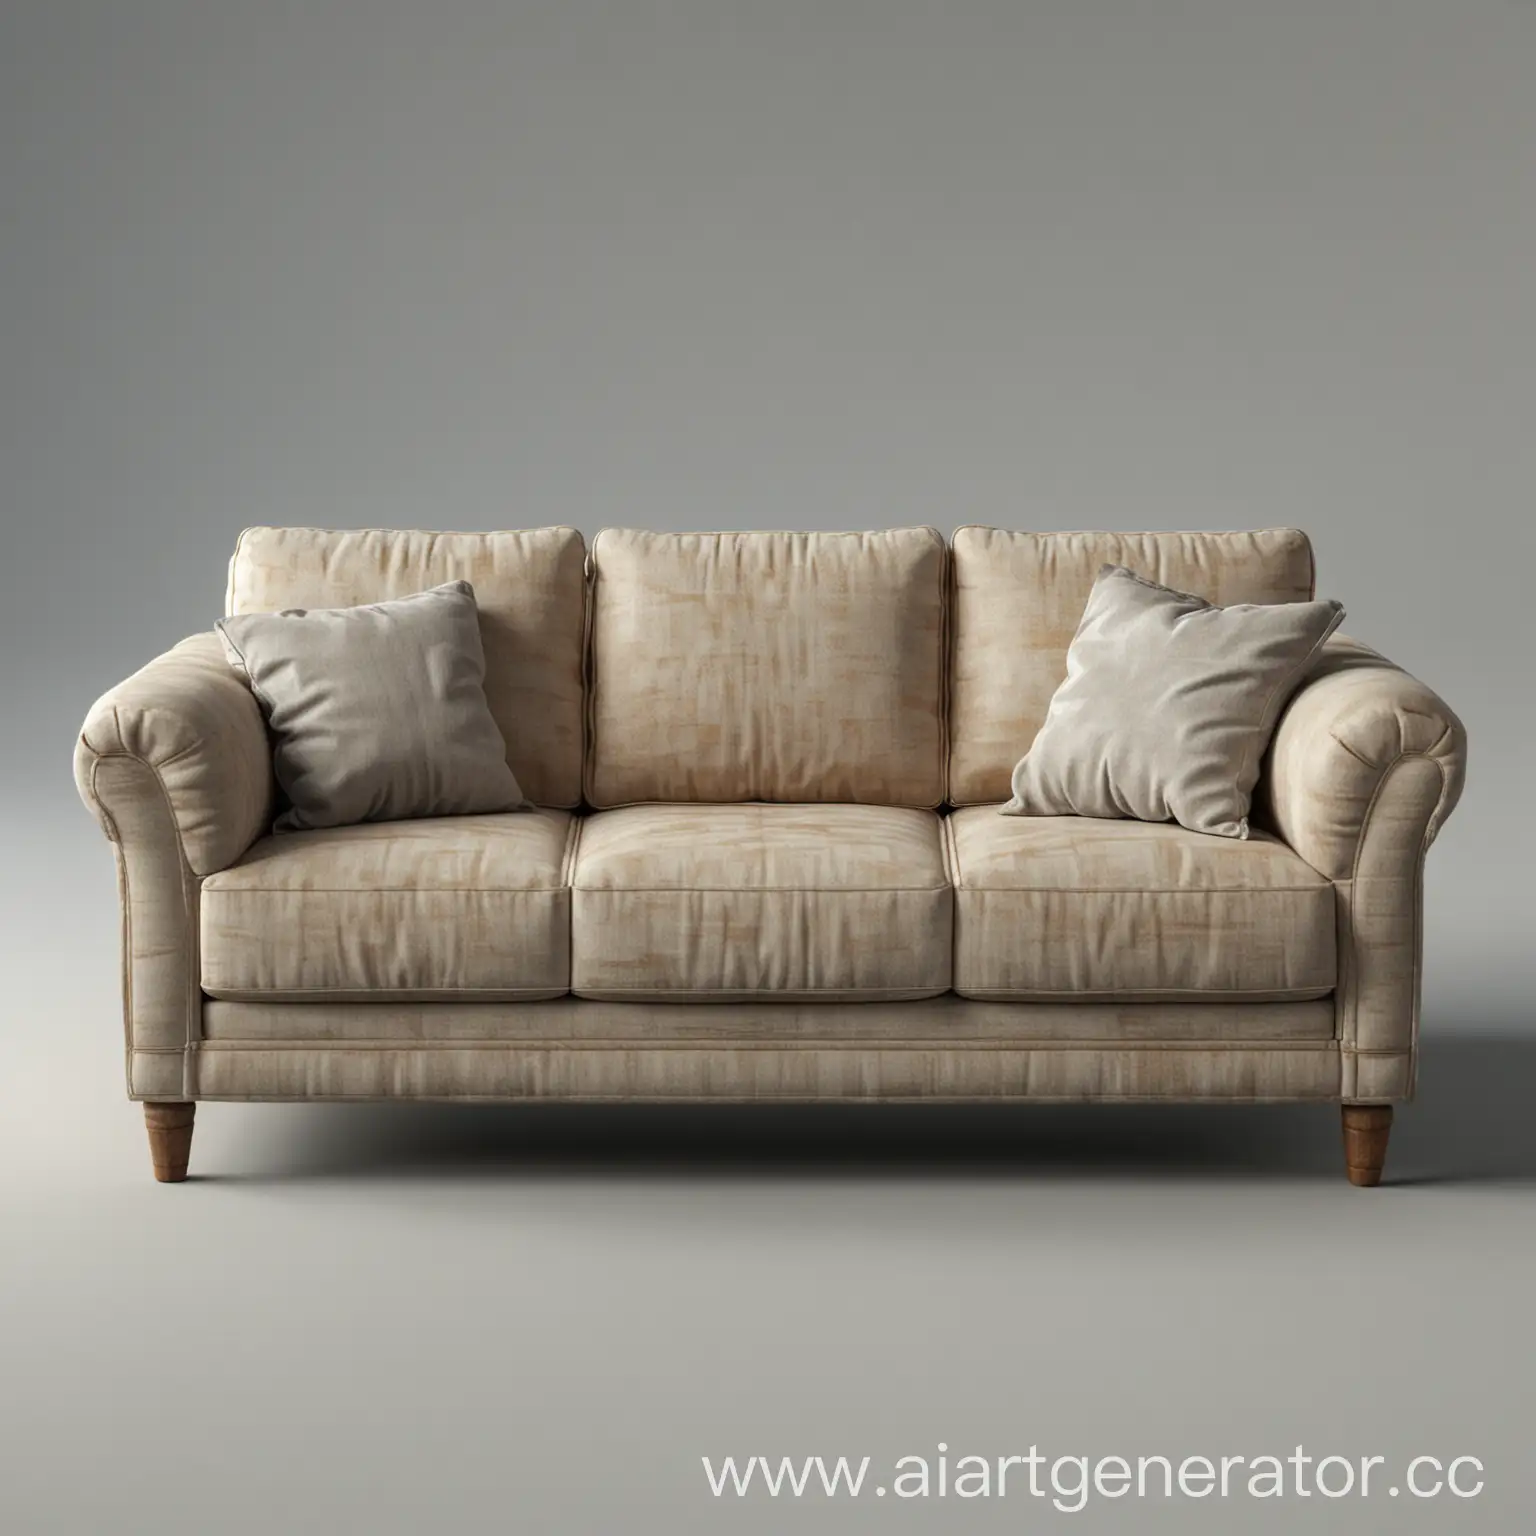 Luxurious-Leather-Sofa-in-Realistic-Setting